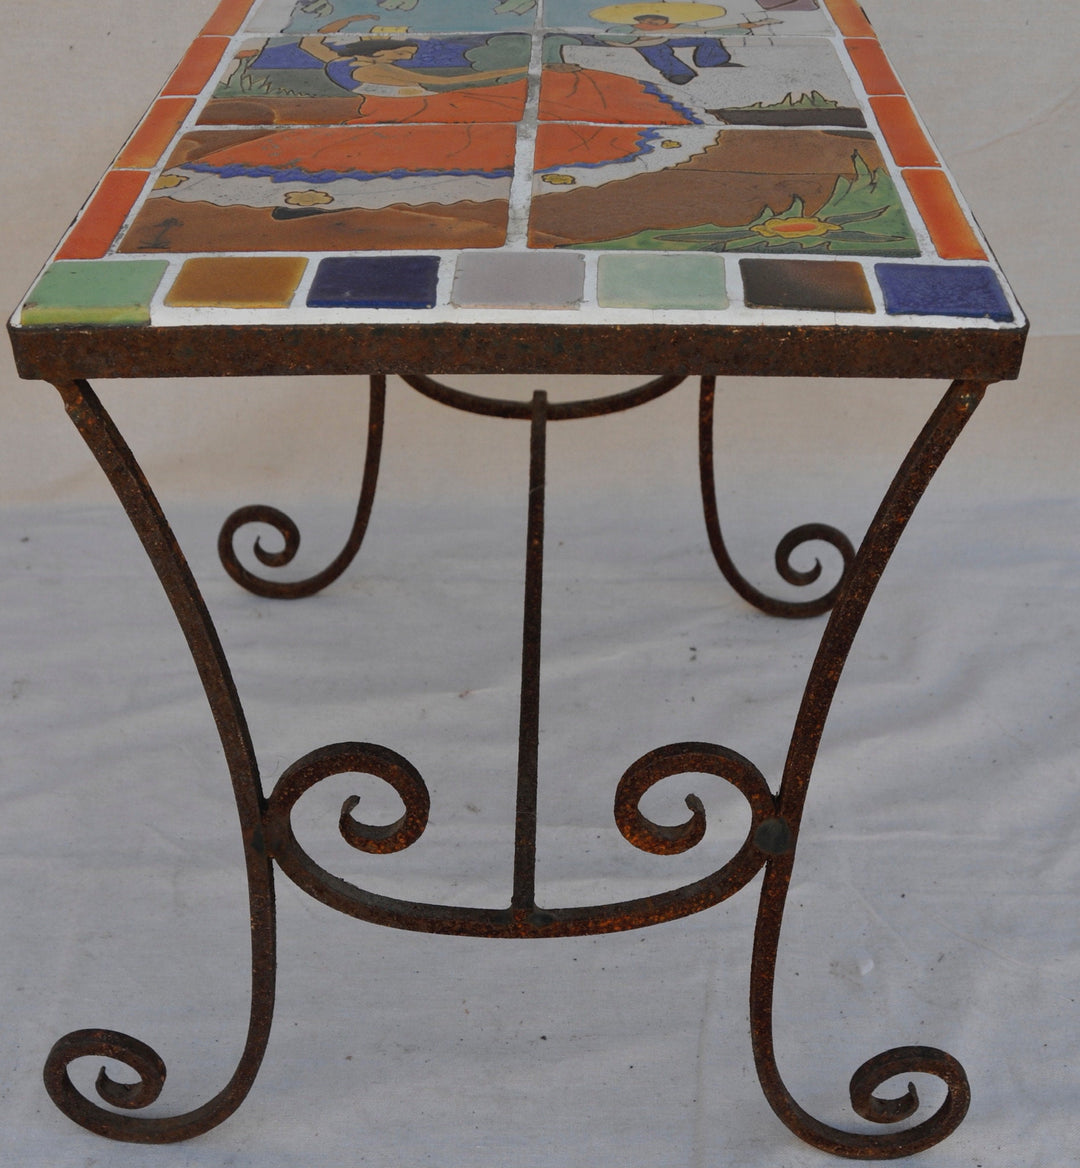 San Josè Tile, Dancers, Table with Wrought Iron